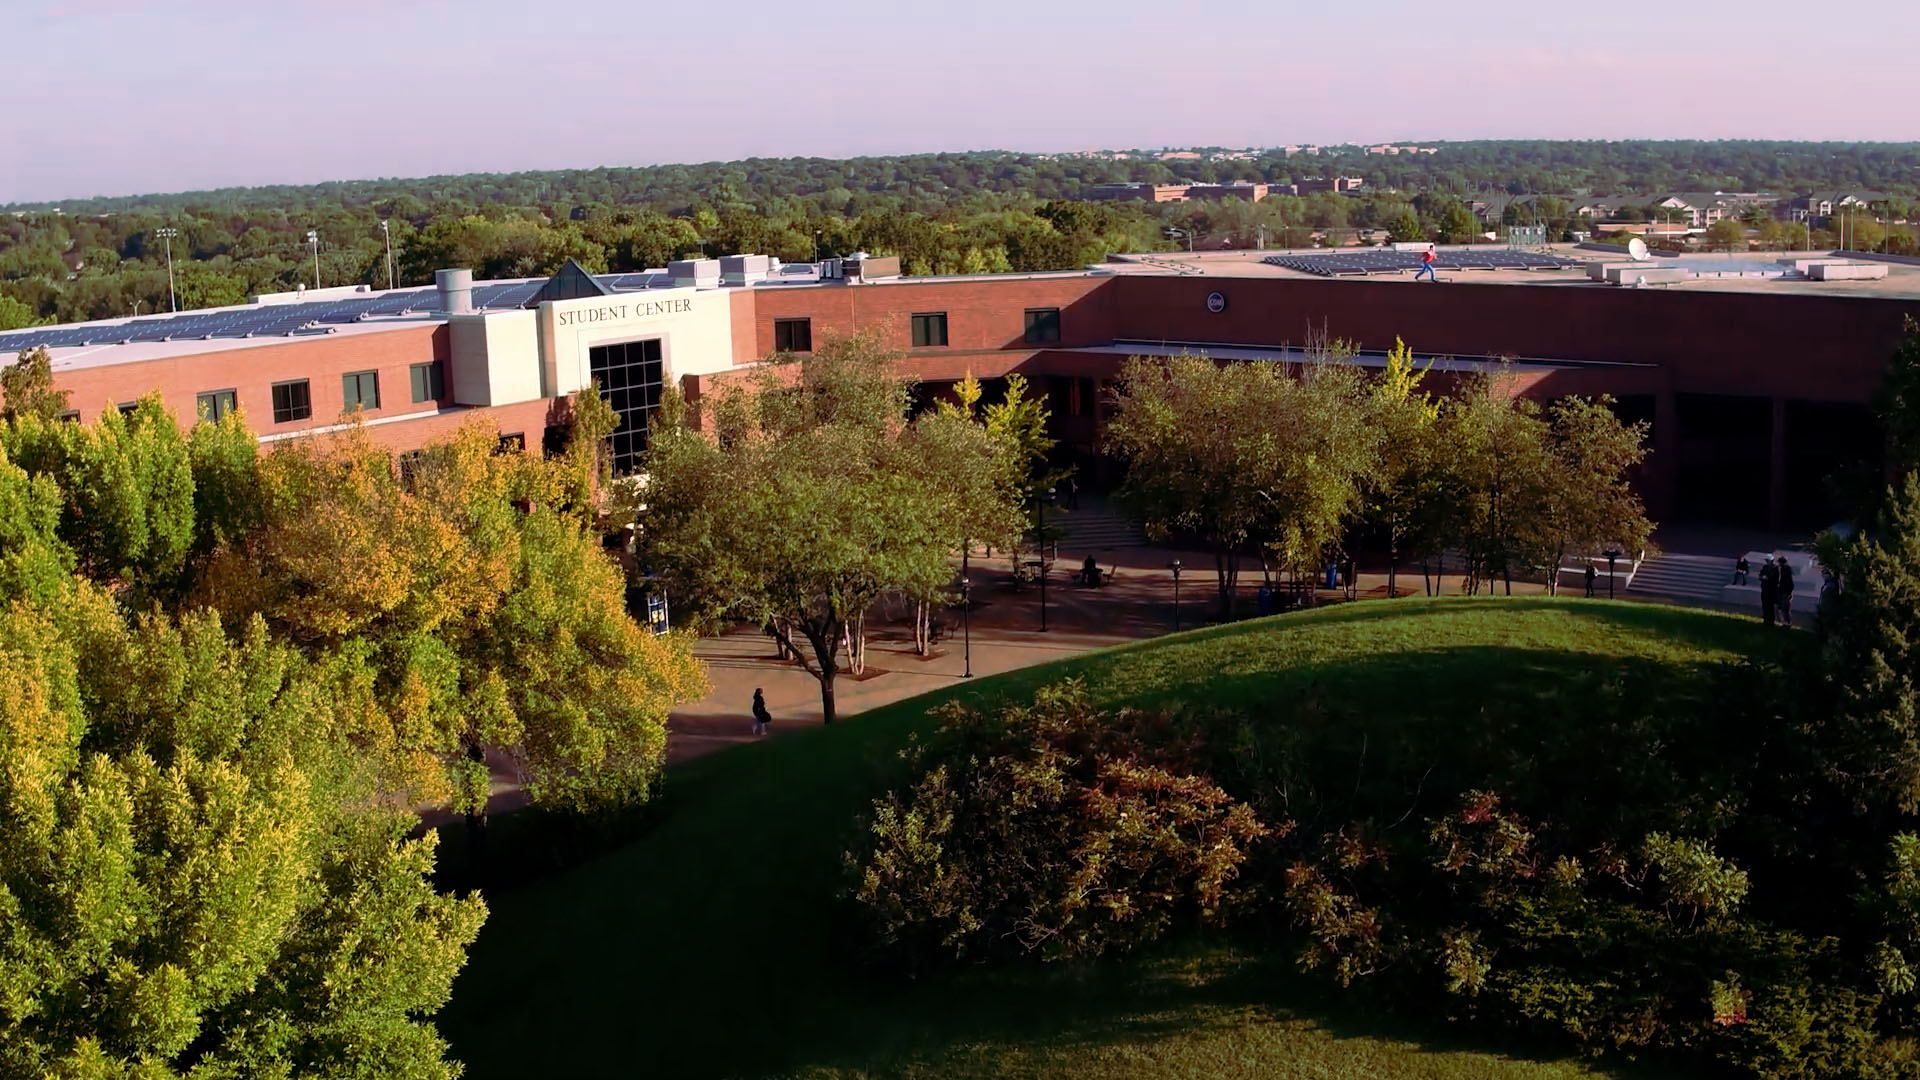 Drone aerial shot of the campus featuring the Student Center